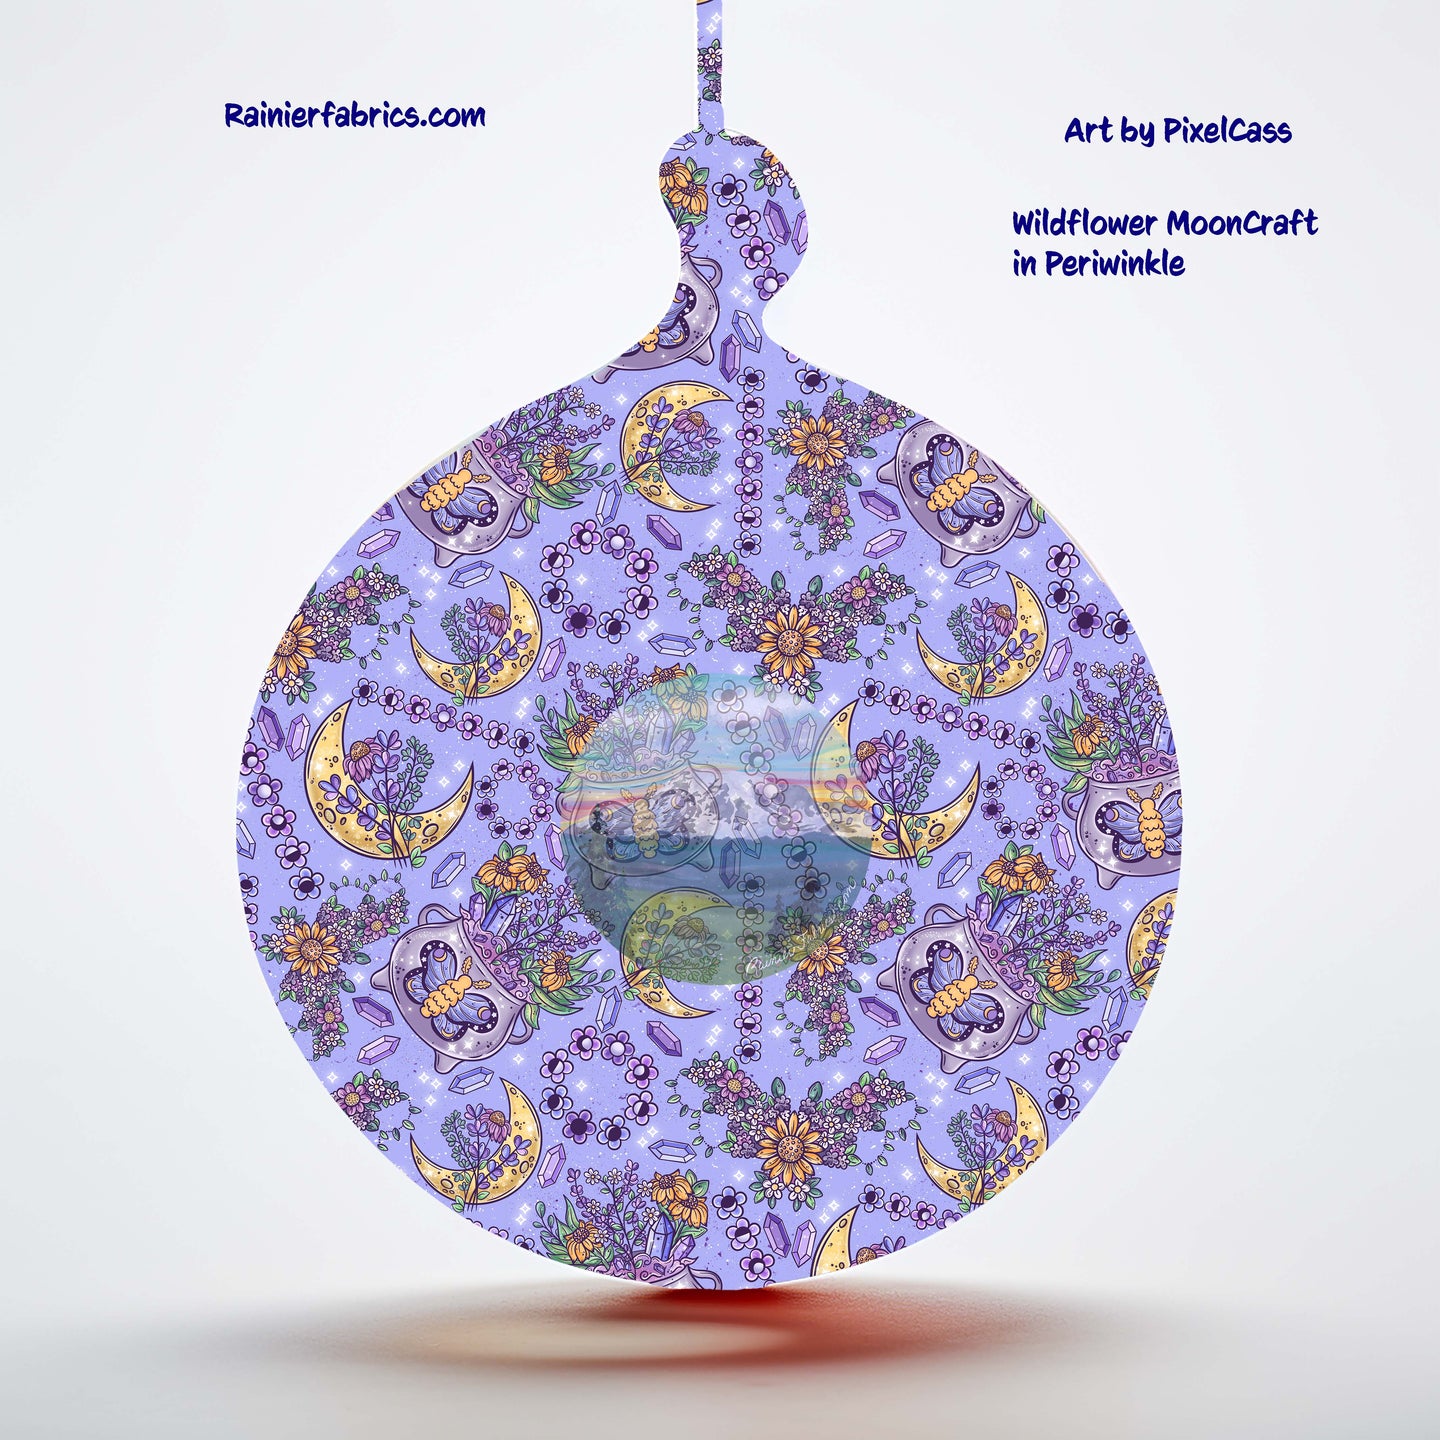 Wildflower MoonCraft in Periwinkle - by PixelCass